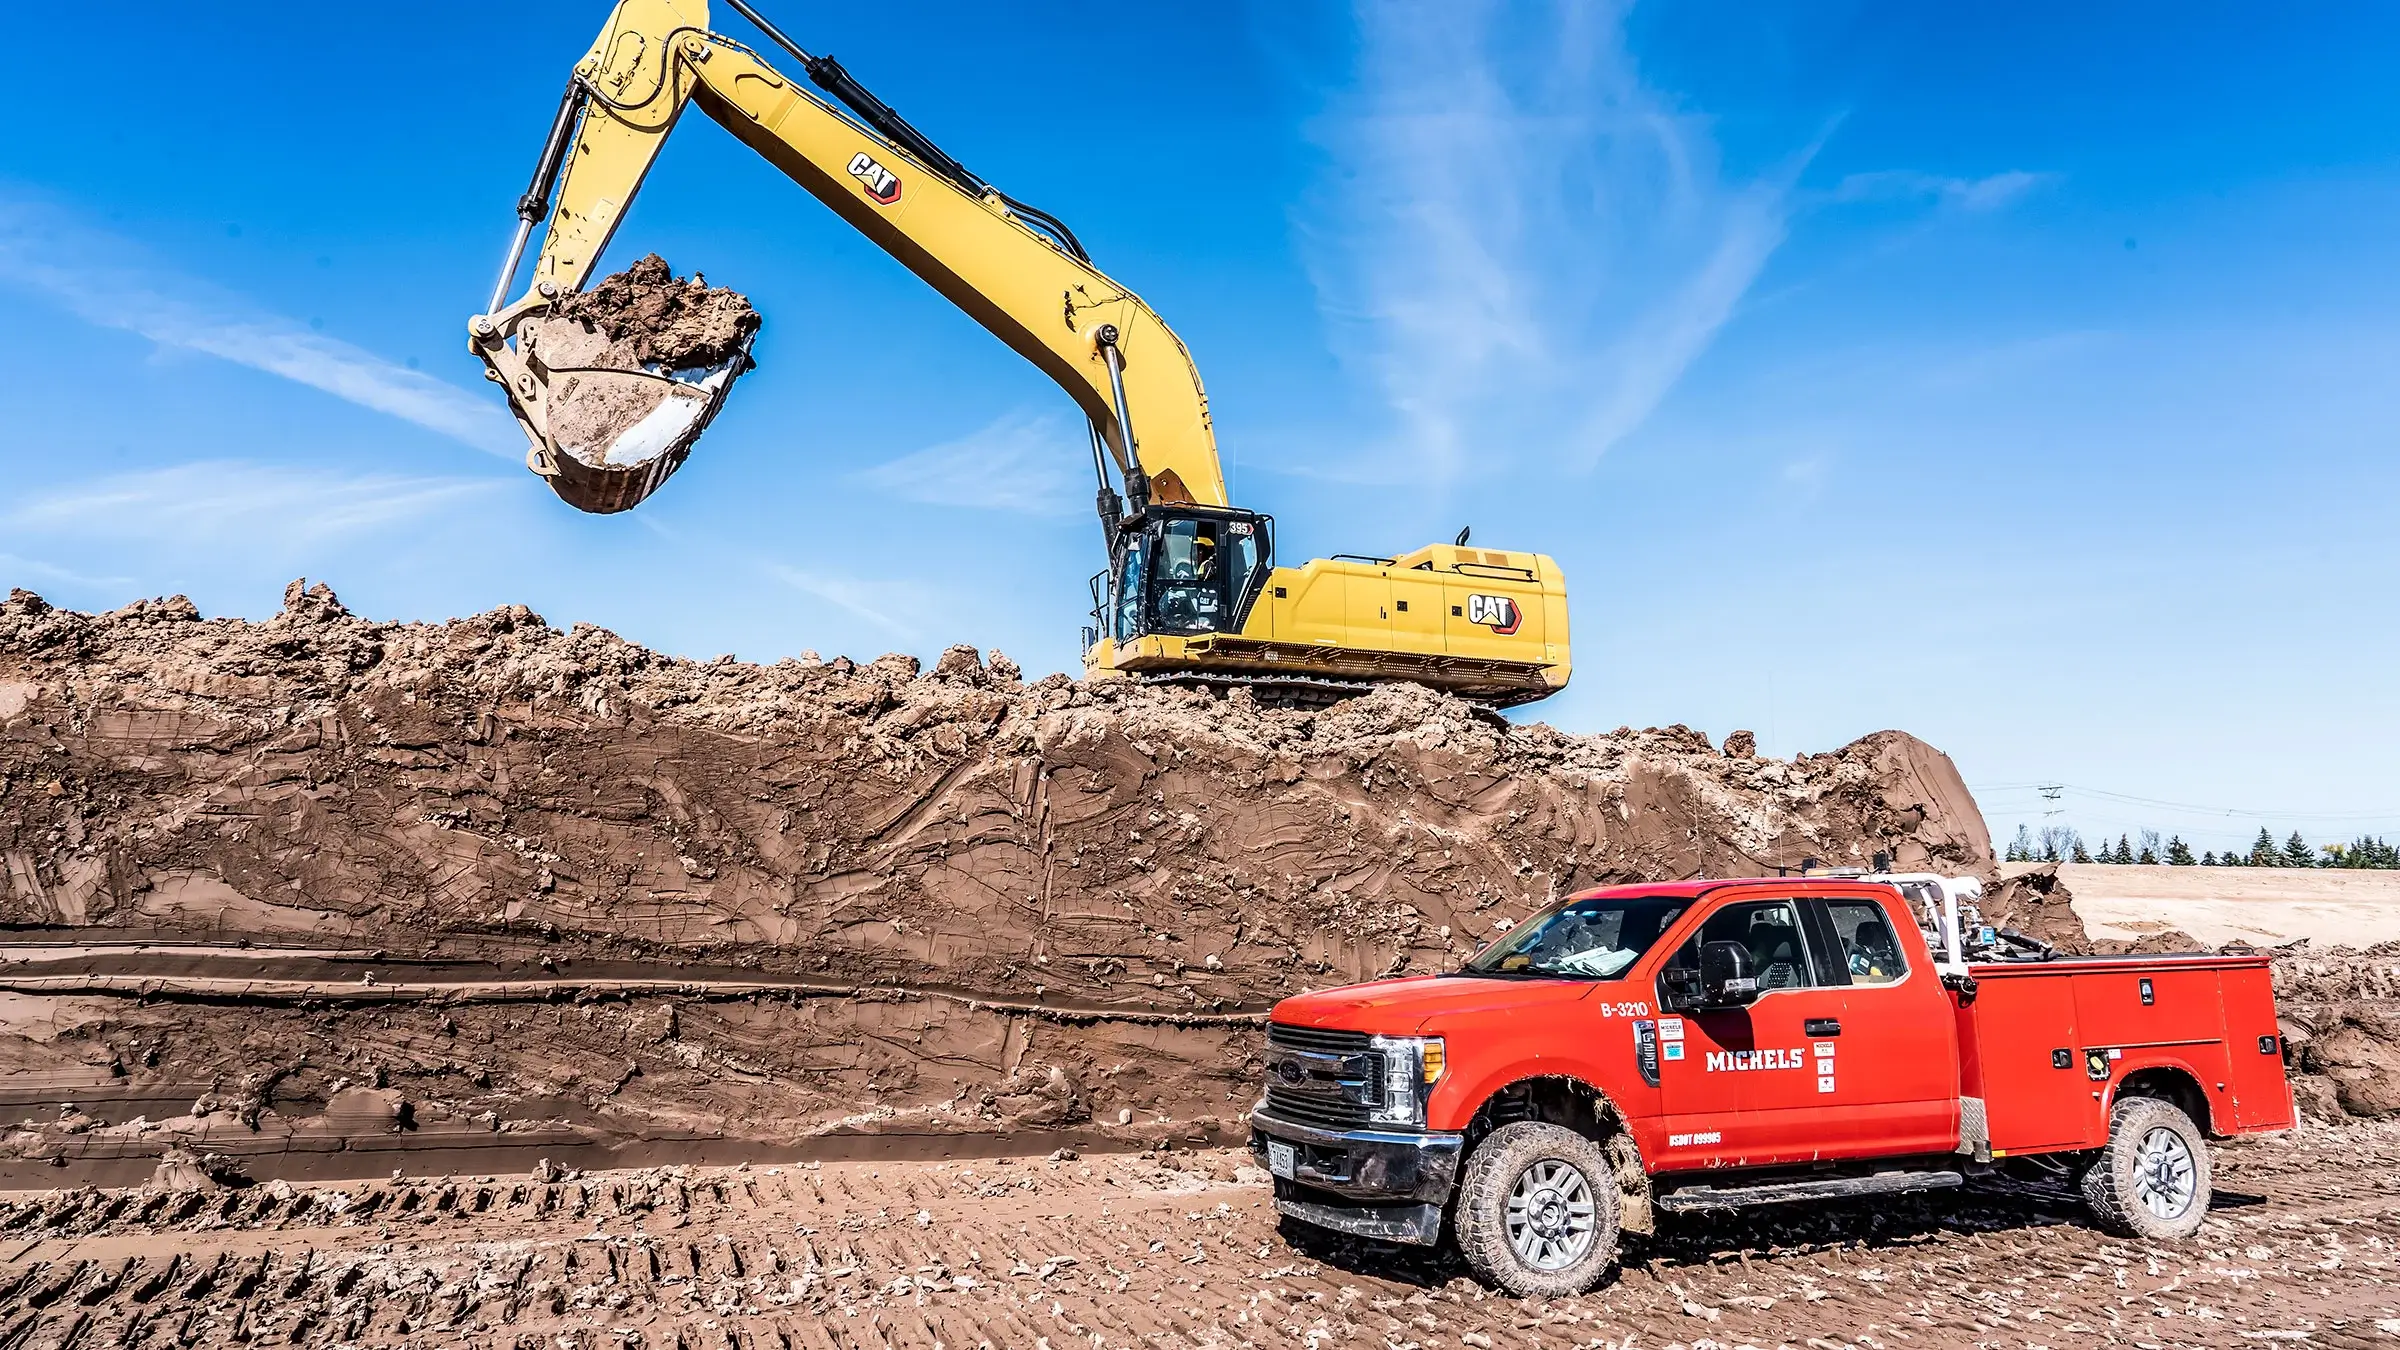 An excavator sits upon a pile of dirt near a red Michels pickup truck.